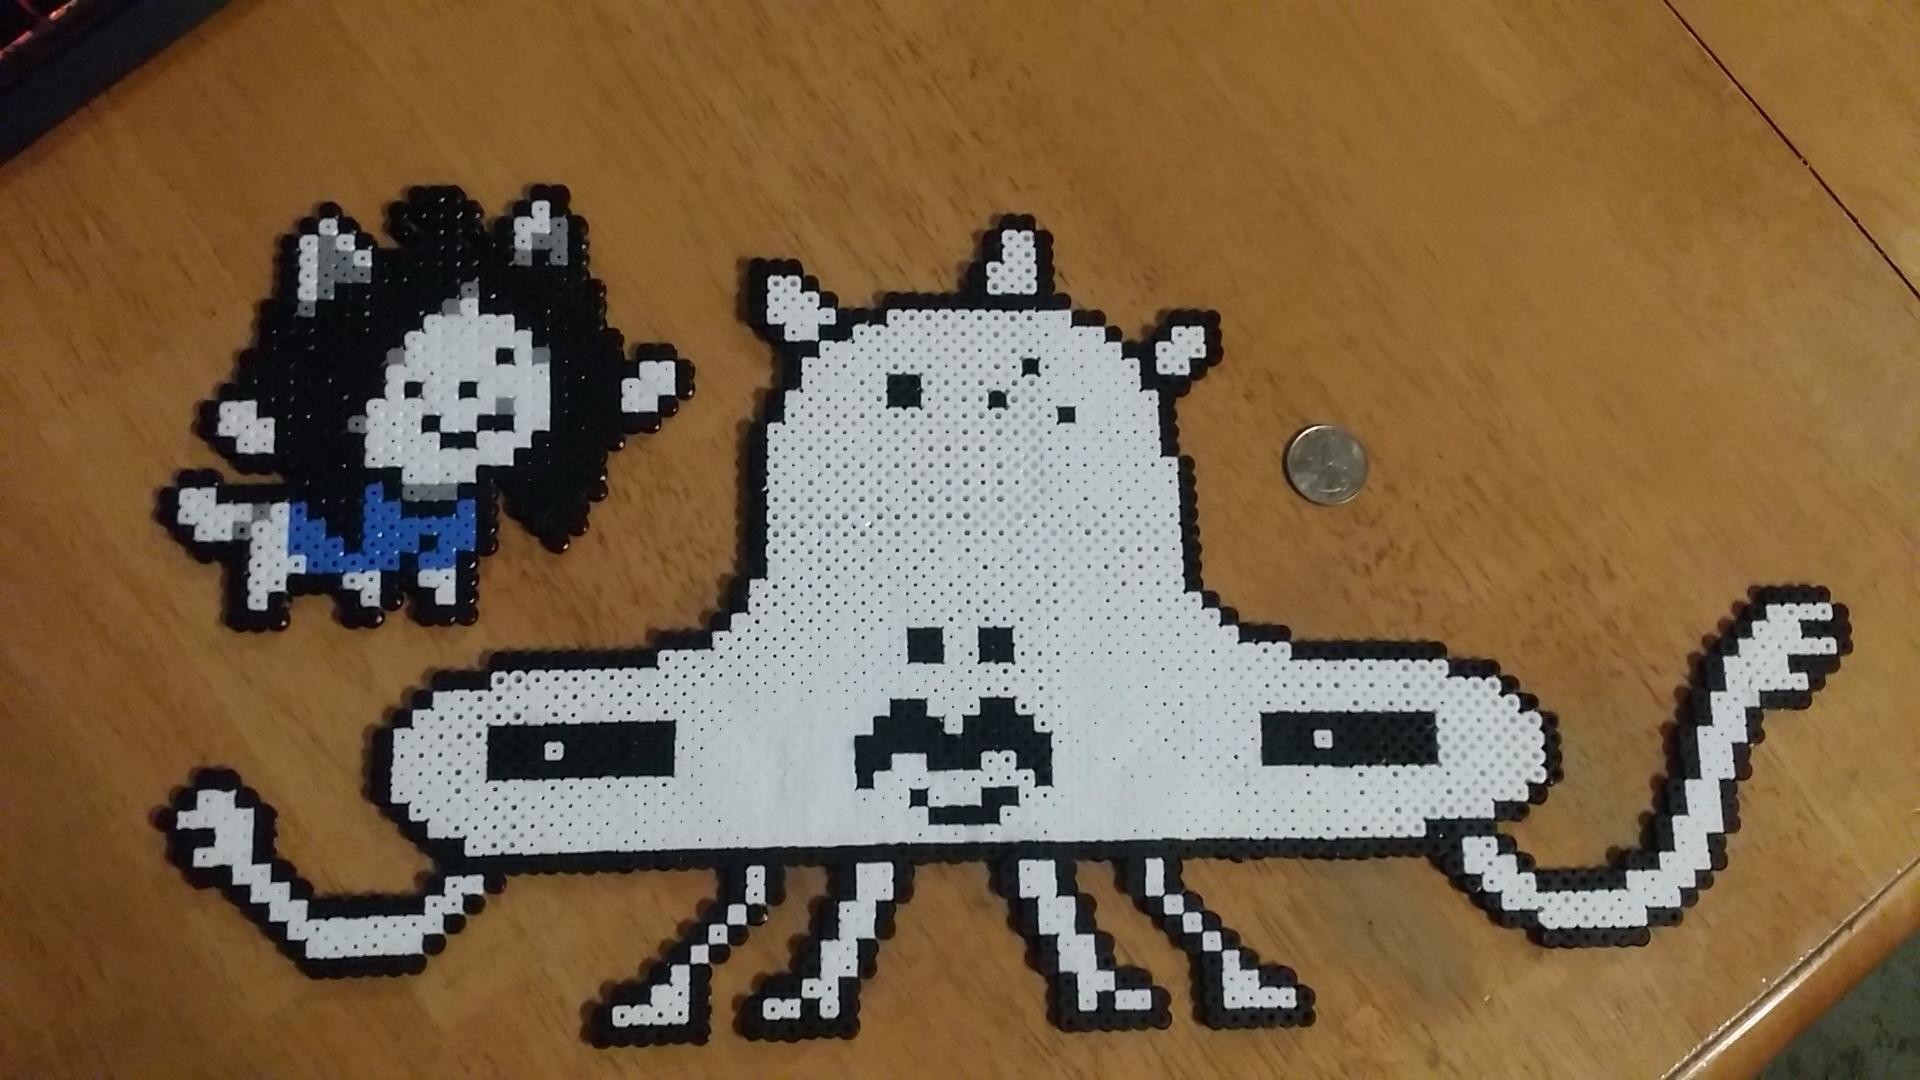 1920x1080 Jerry and tem from Undertale, made with Perler Beads!